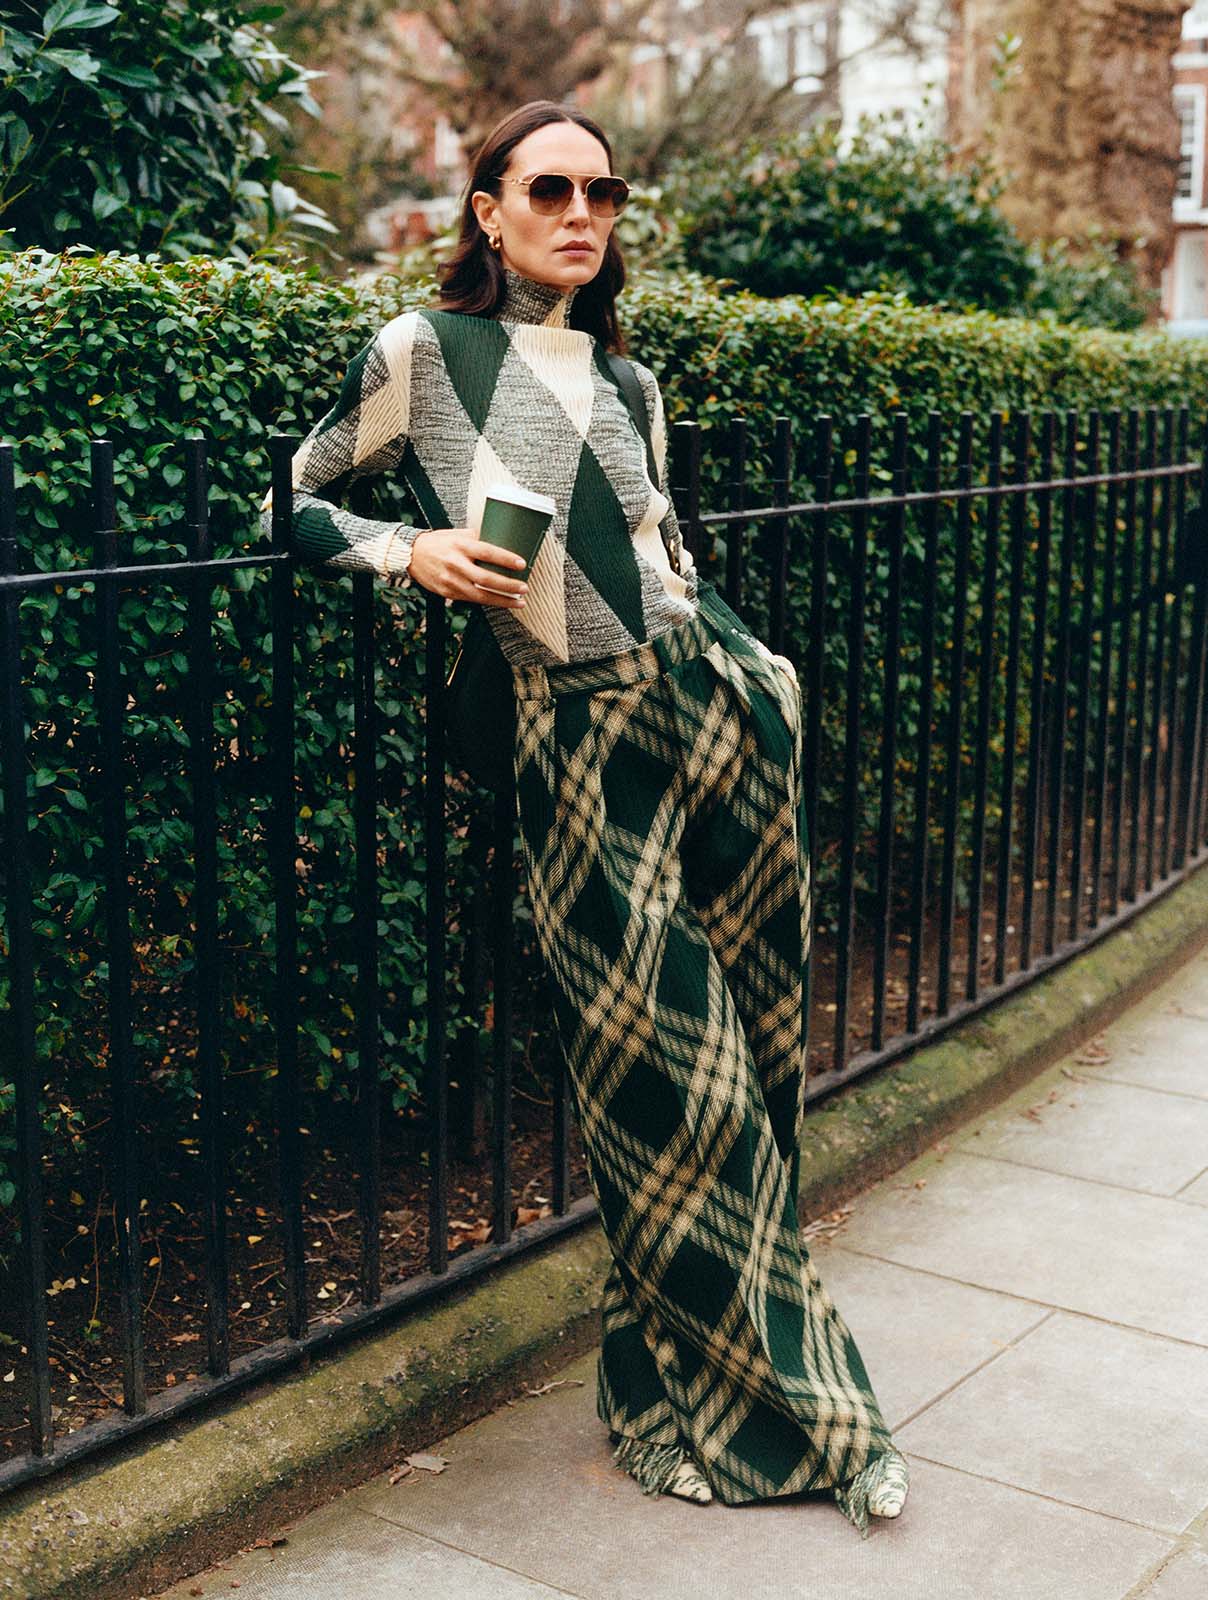 Woman wears green check Burberry jumper and trousers, holding a Harrods takeaway coffee cup